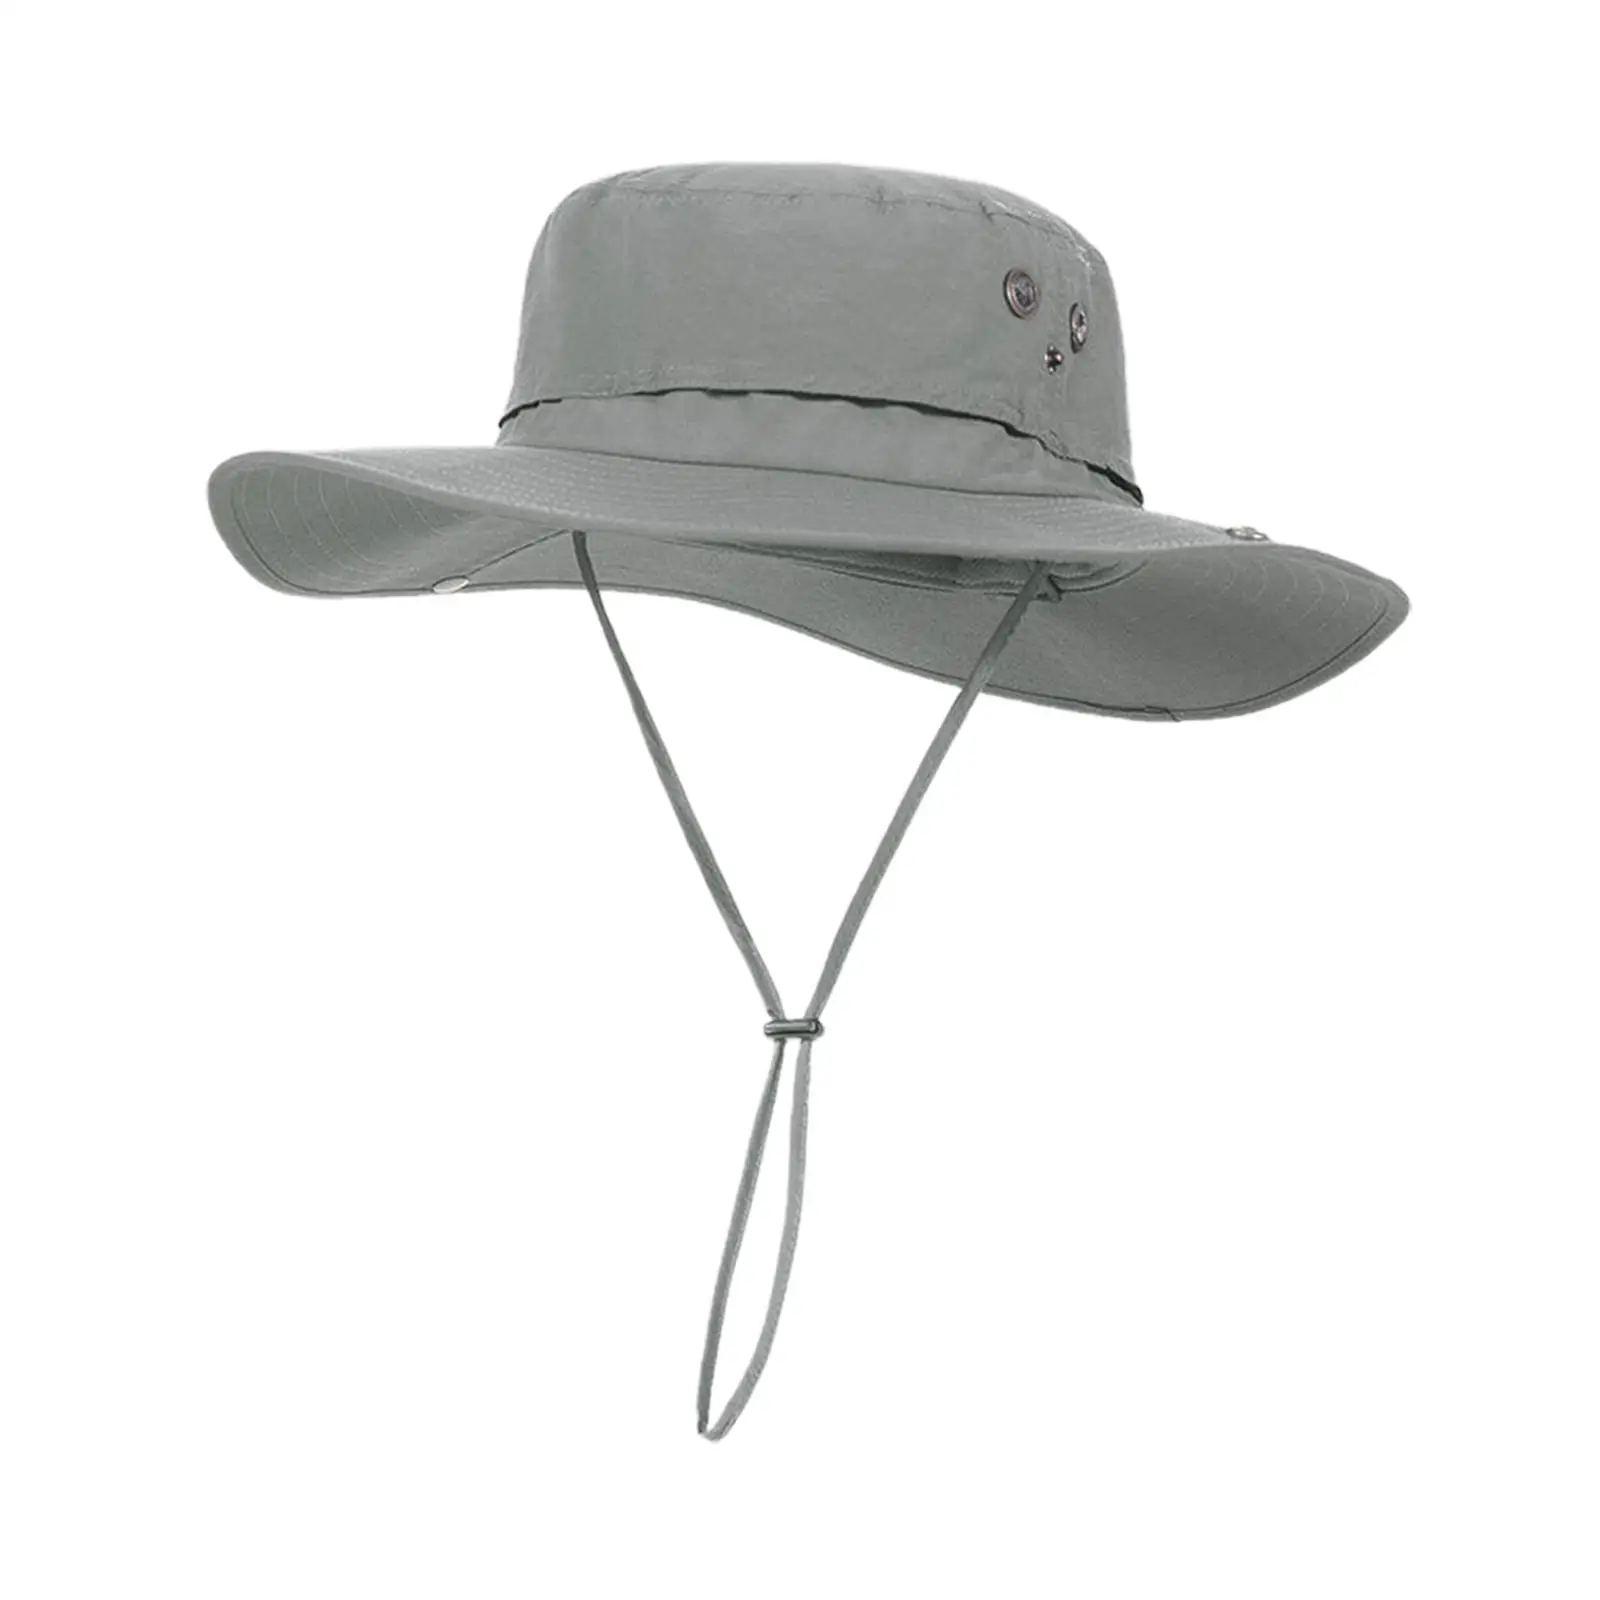 Sun Protection Hat Waterproof Breathable with Strings Wide Brim Bucket Sunhat for Fishing Hat Outdoor Travel Garden Women Men